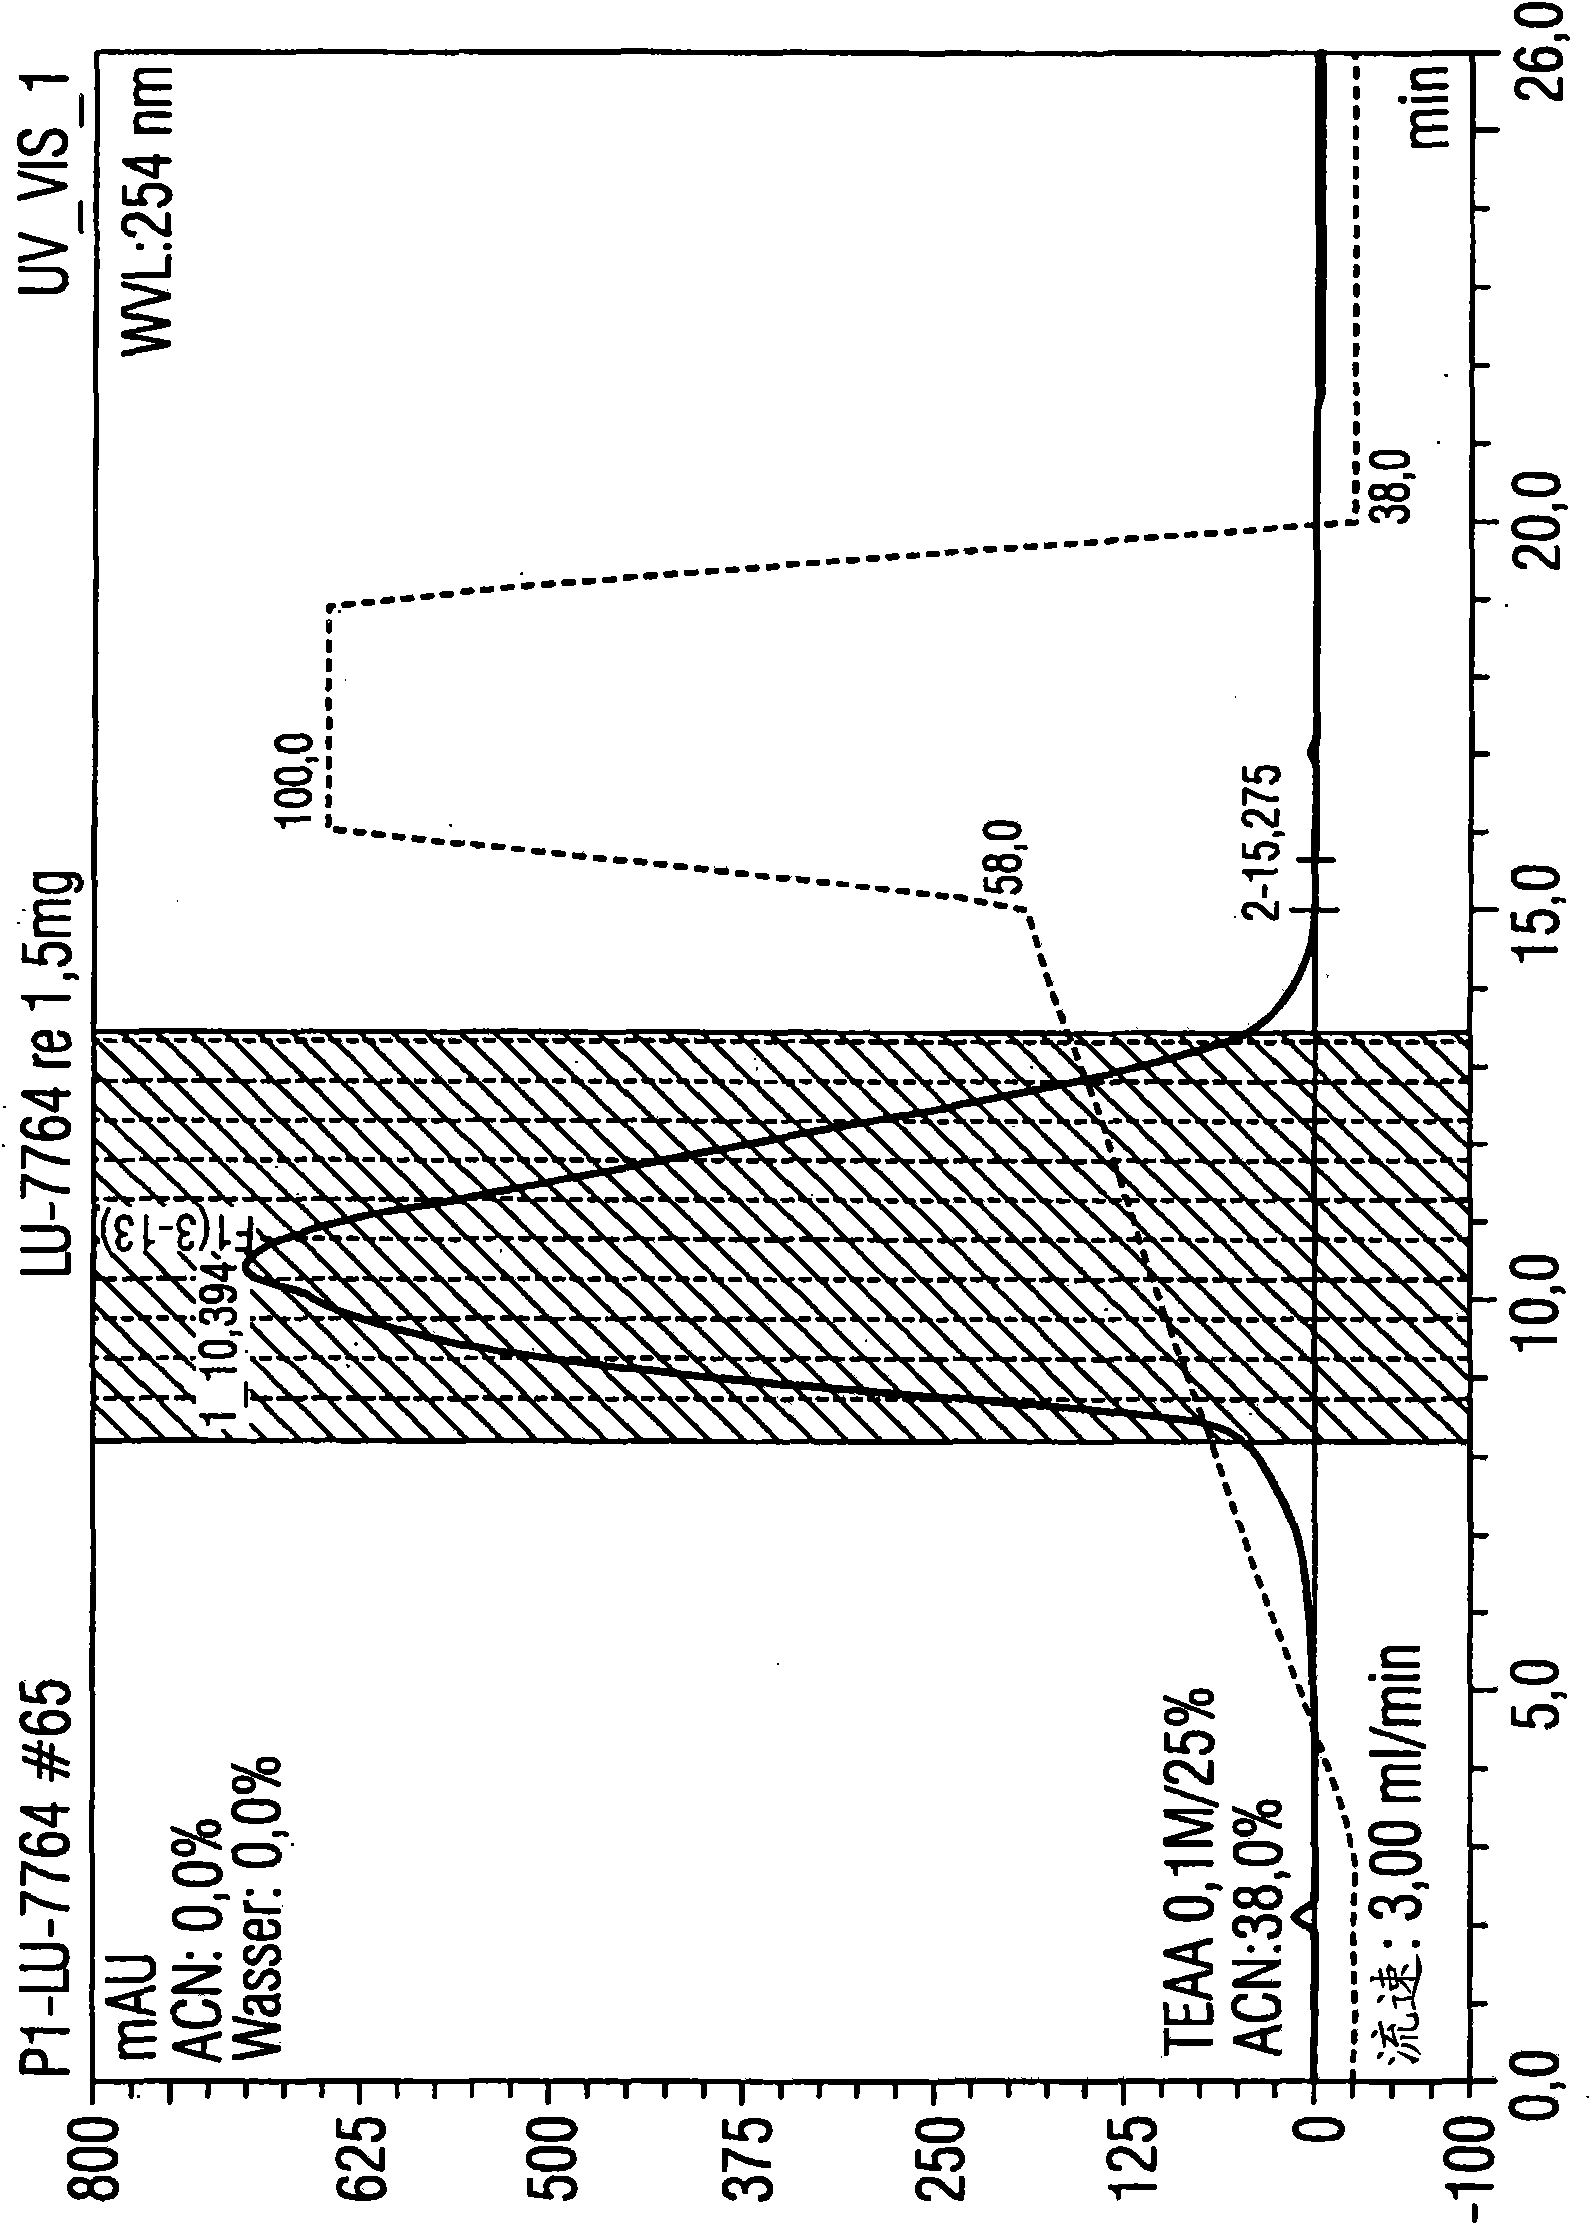 Method for purifying RNA on preparative scale by means of HPLC